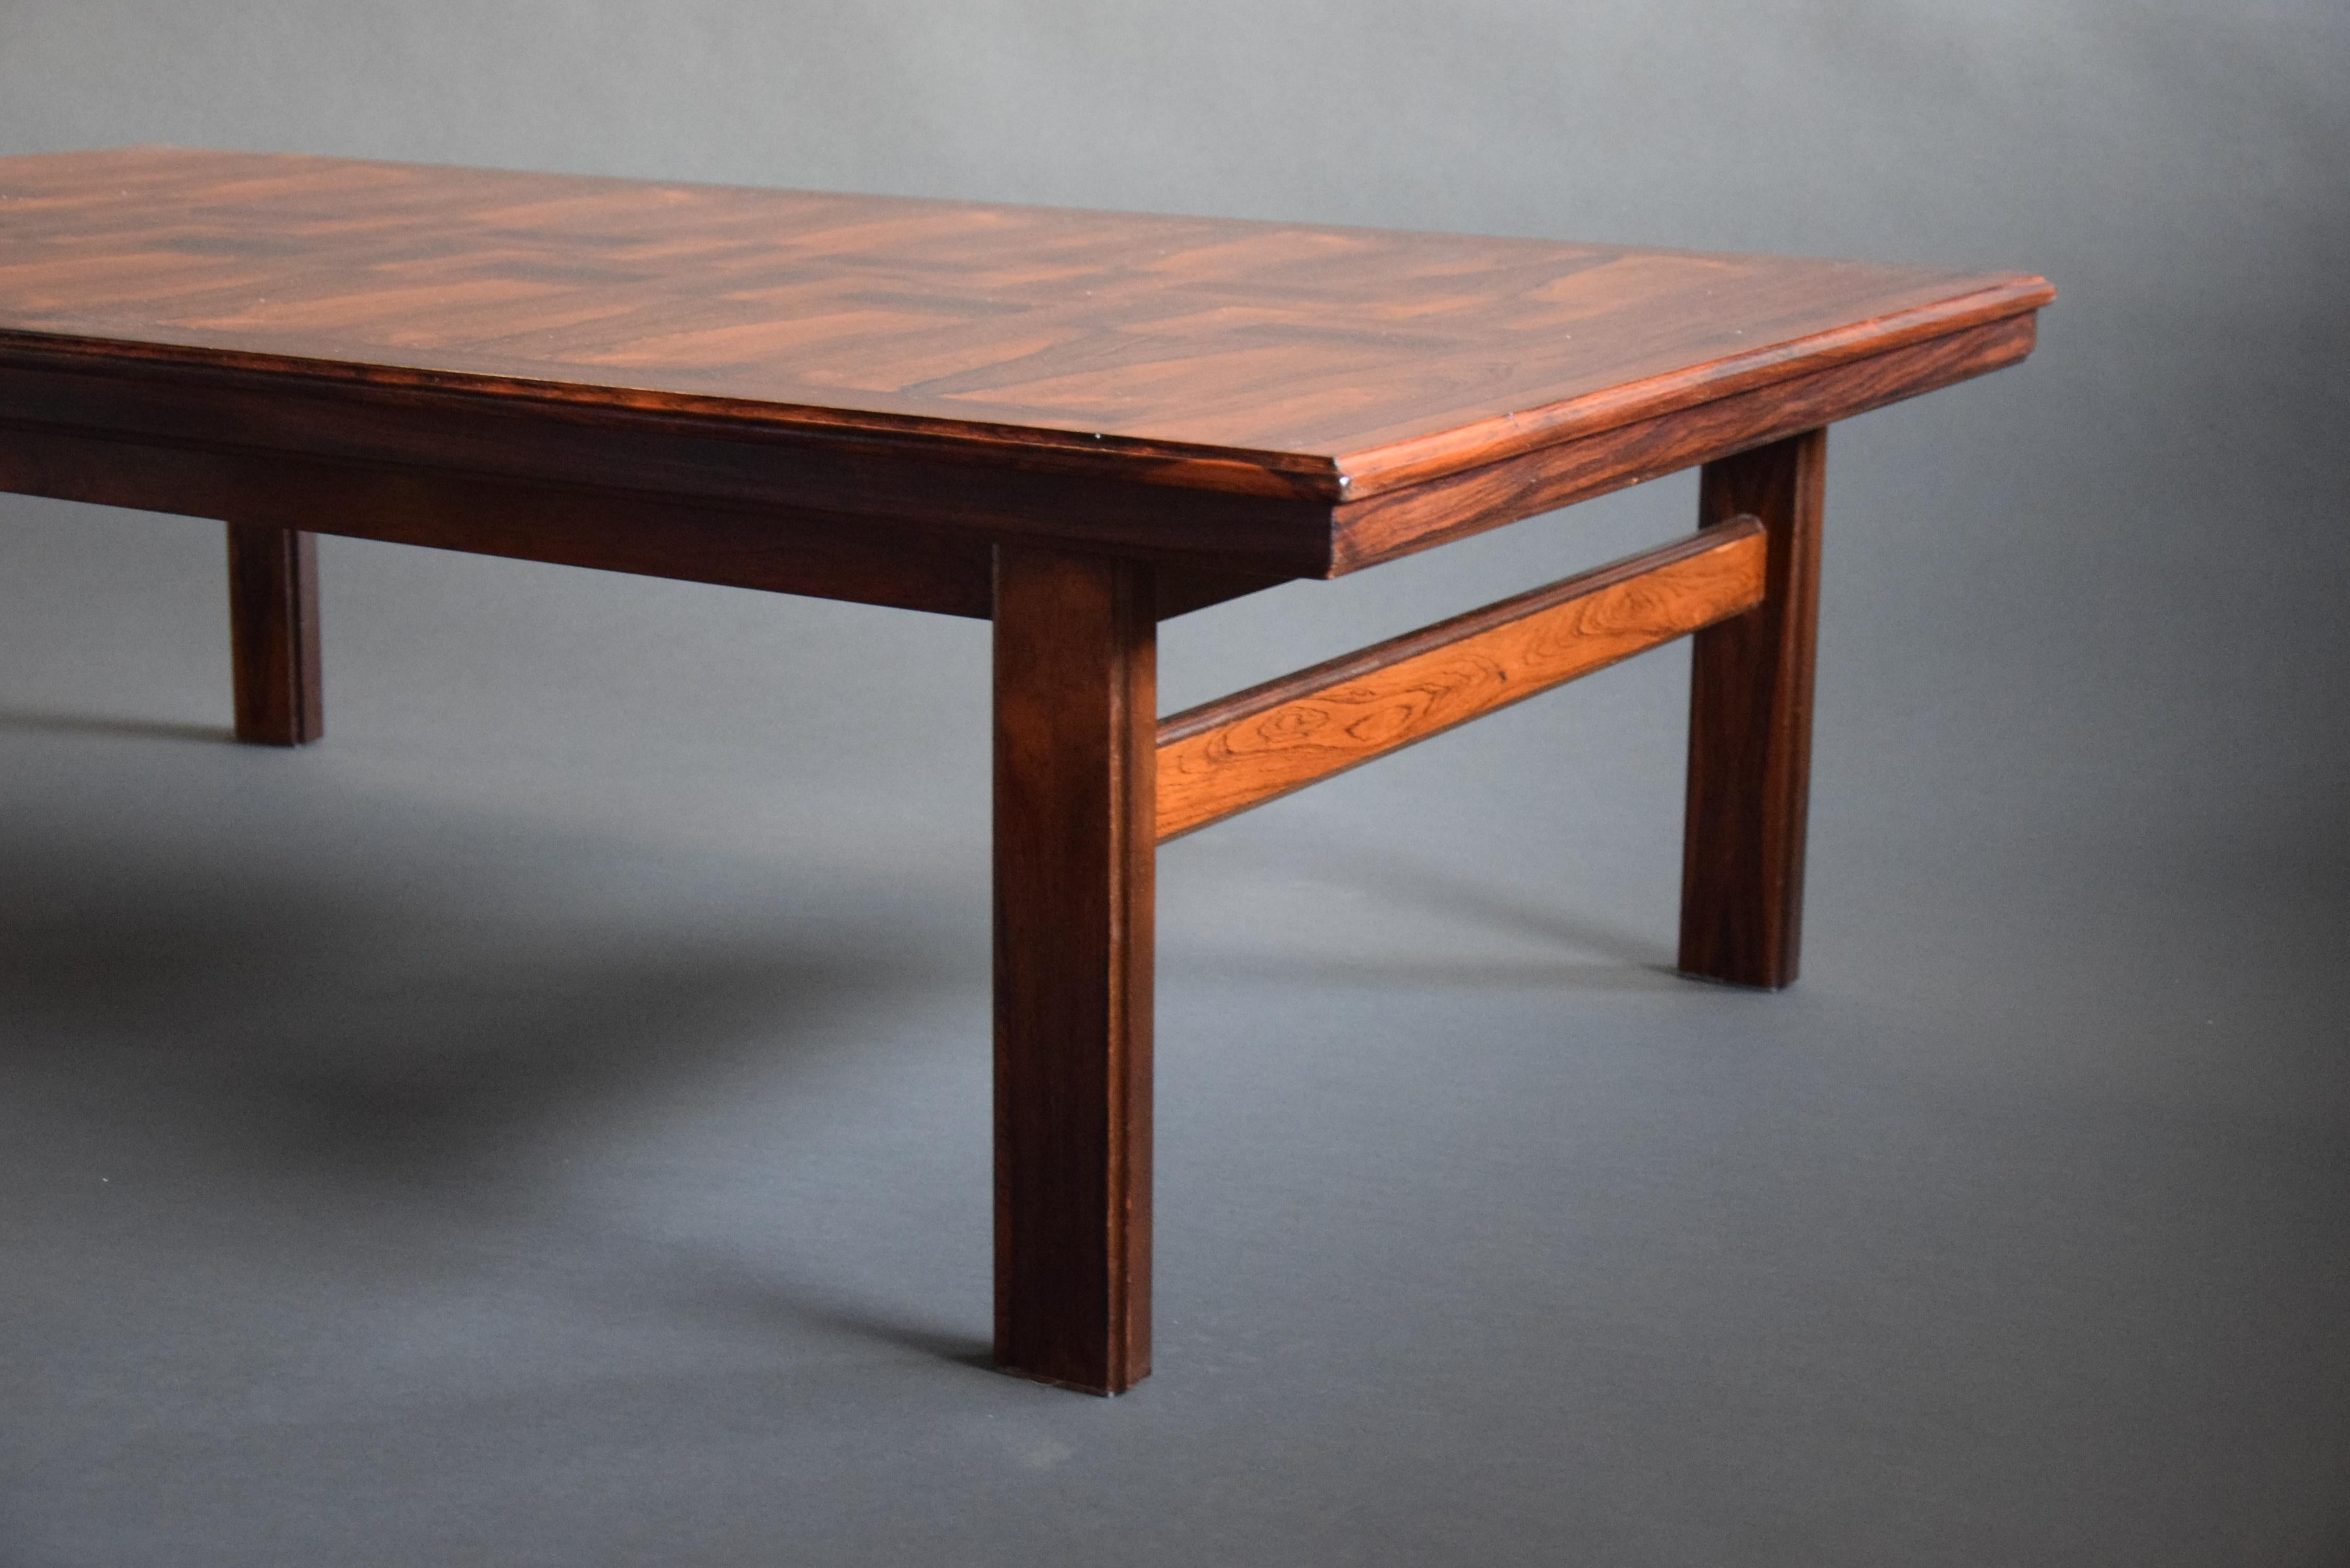 Mid-20th Century Norwegian Mid-Century Modern Wooden Coffee Table For Sale